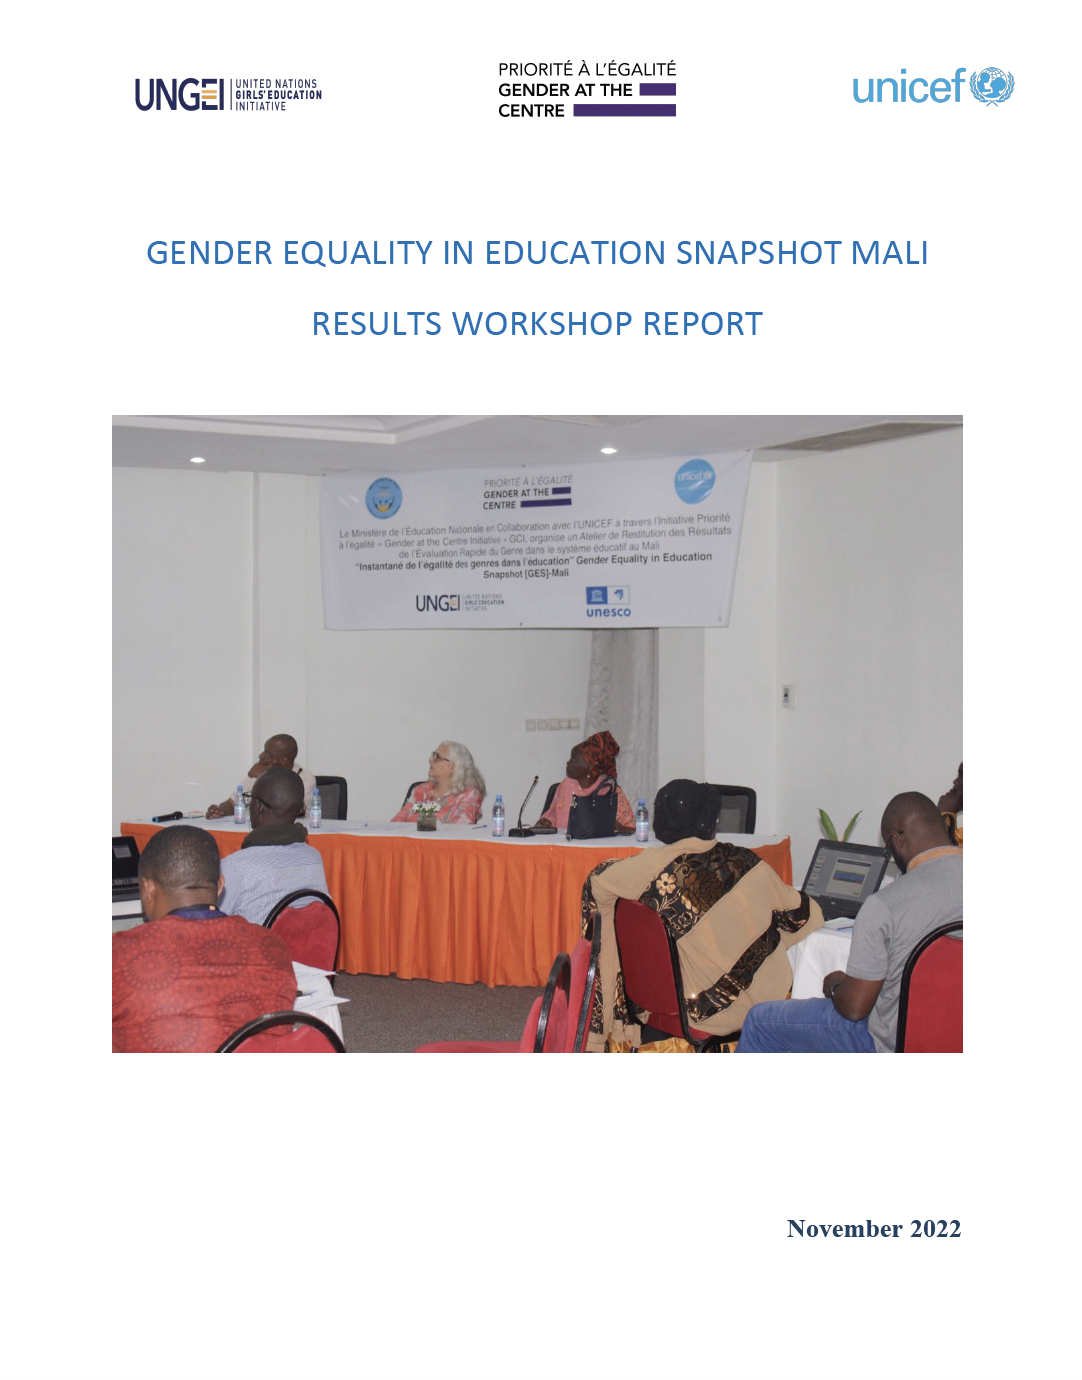 Gender Equality in Education Snapshot (GES) Report Mali